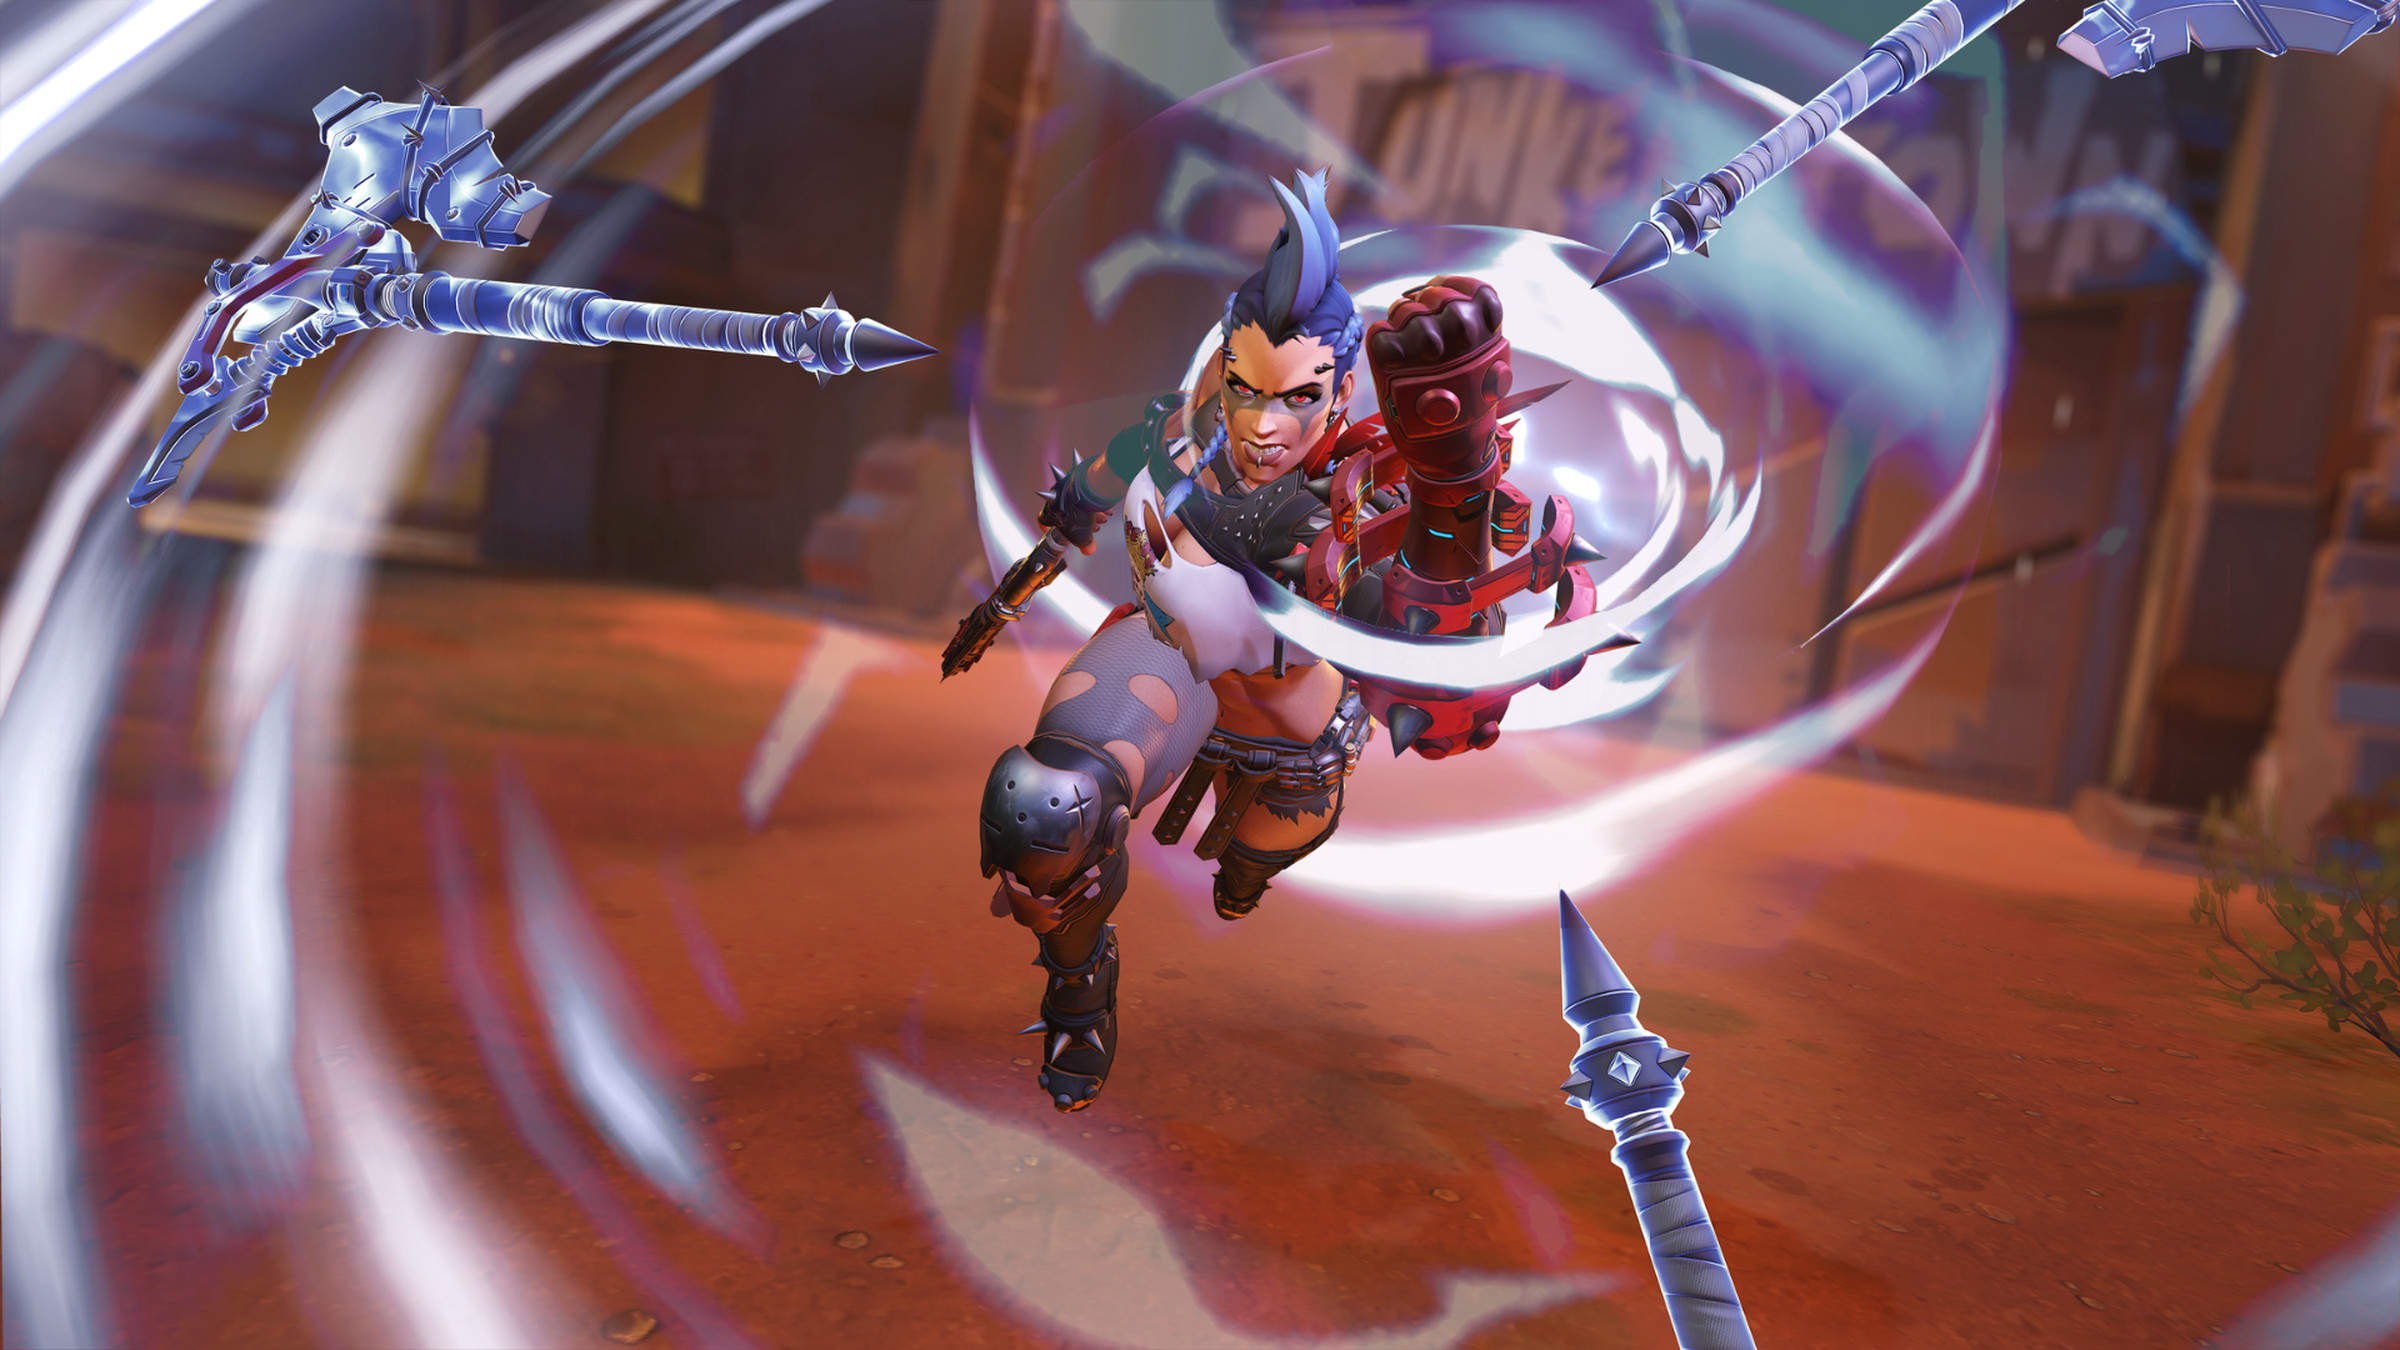 Image of Junker Queen triggering her spinning axe ultimate ability